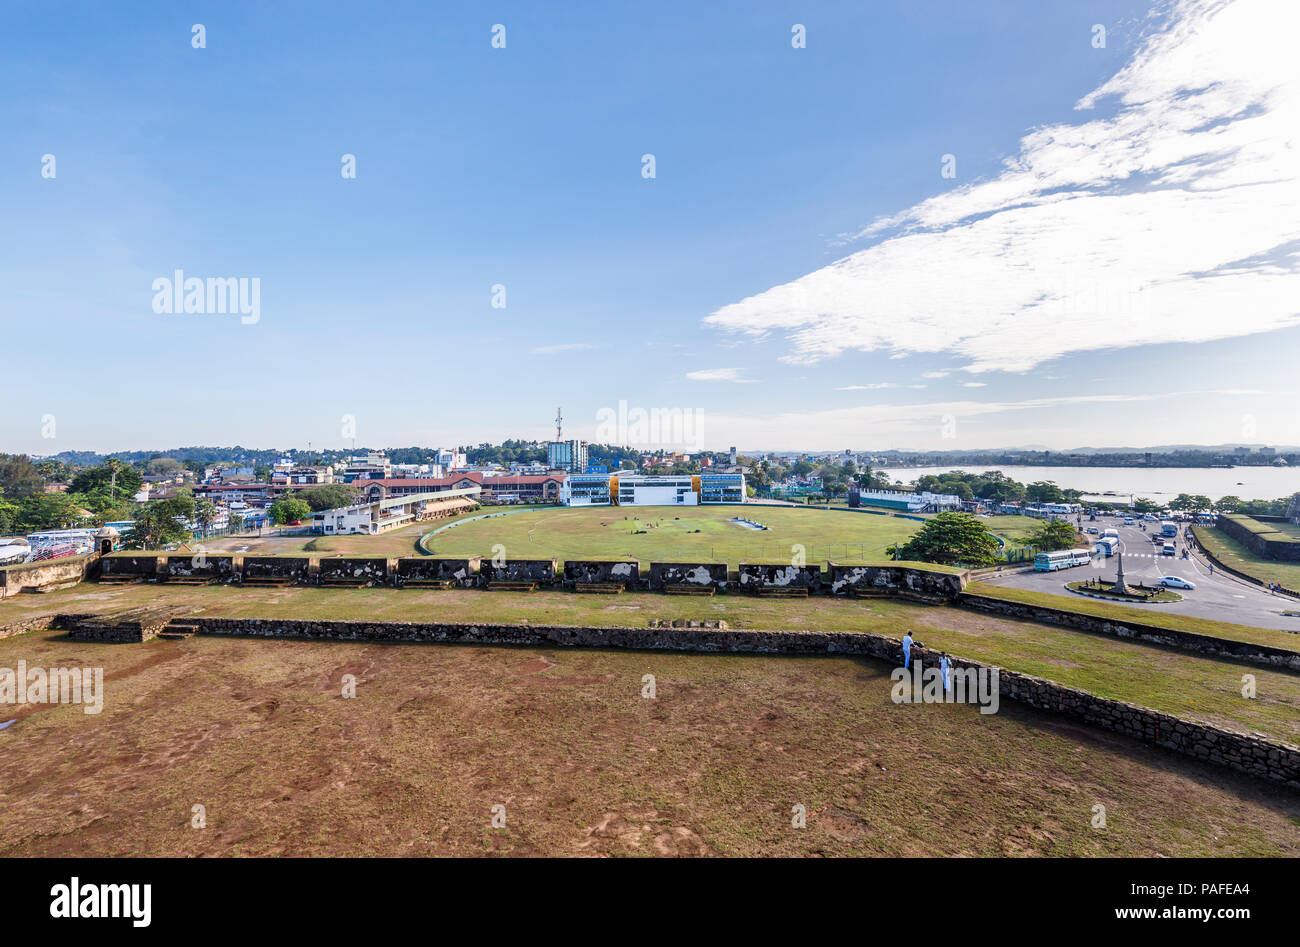 Panoramic view of the famous Galle cricket ground (Galle International Stadium) from the ramparts of Galle Fort, Galle, Southern Province, Sri Lanka Stock Photo